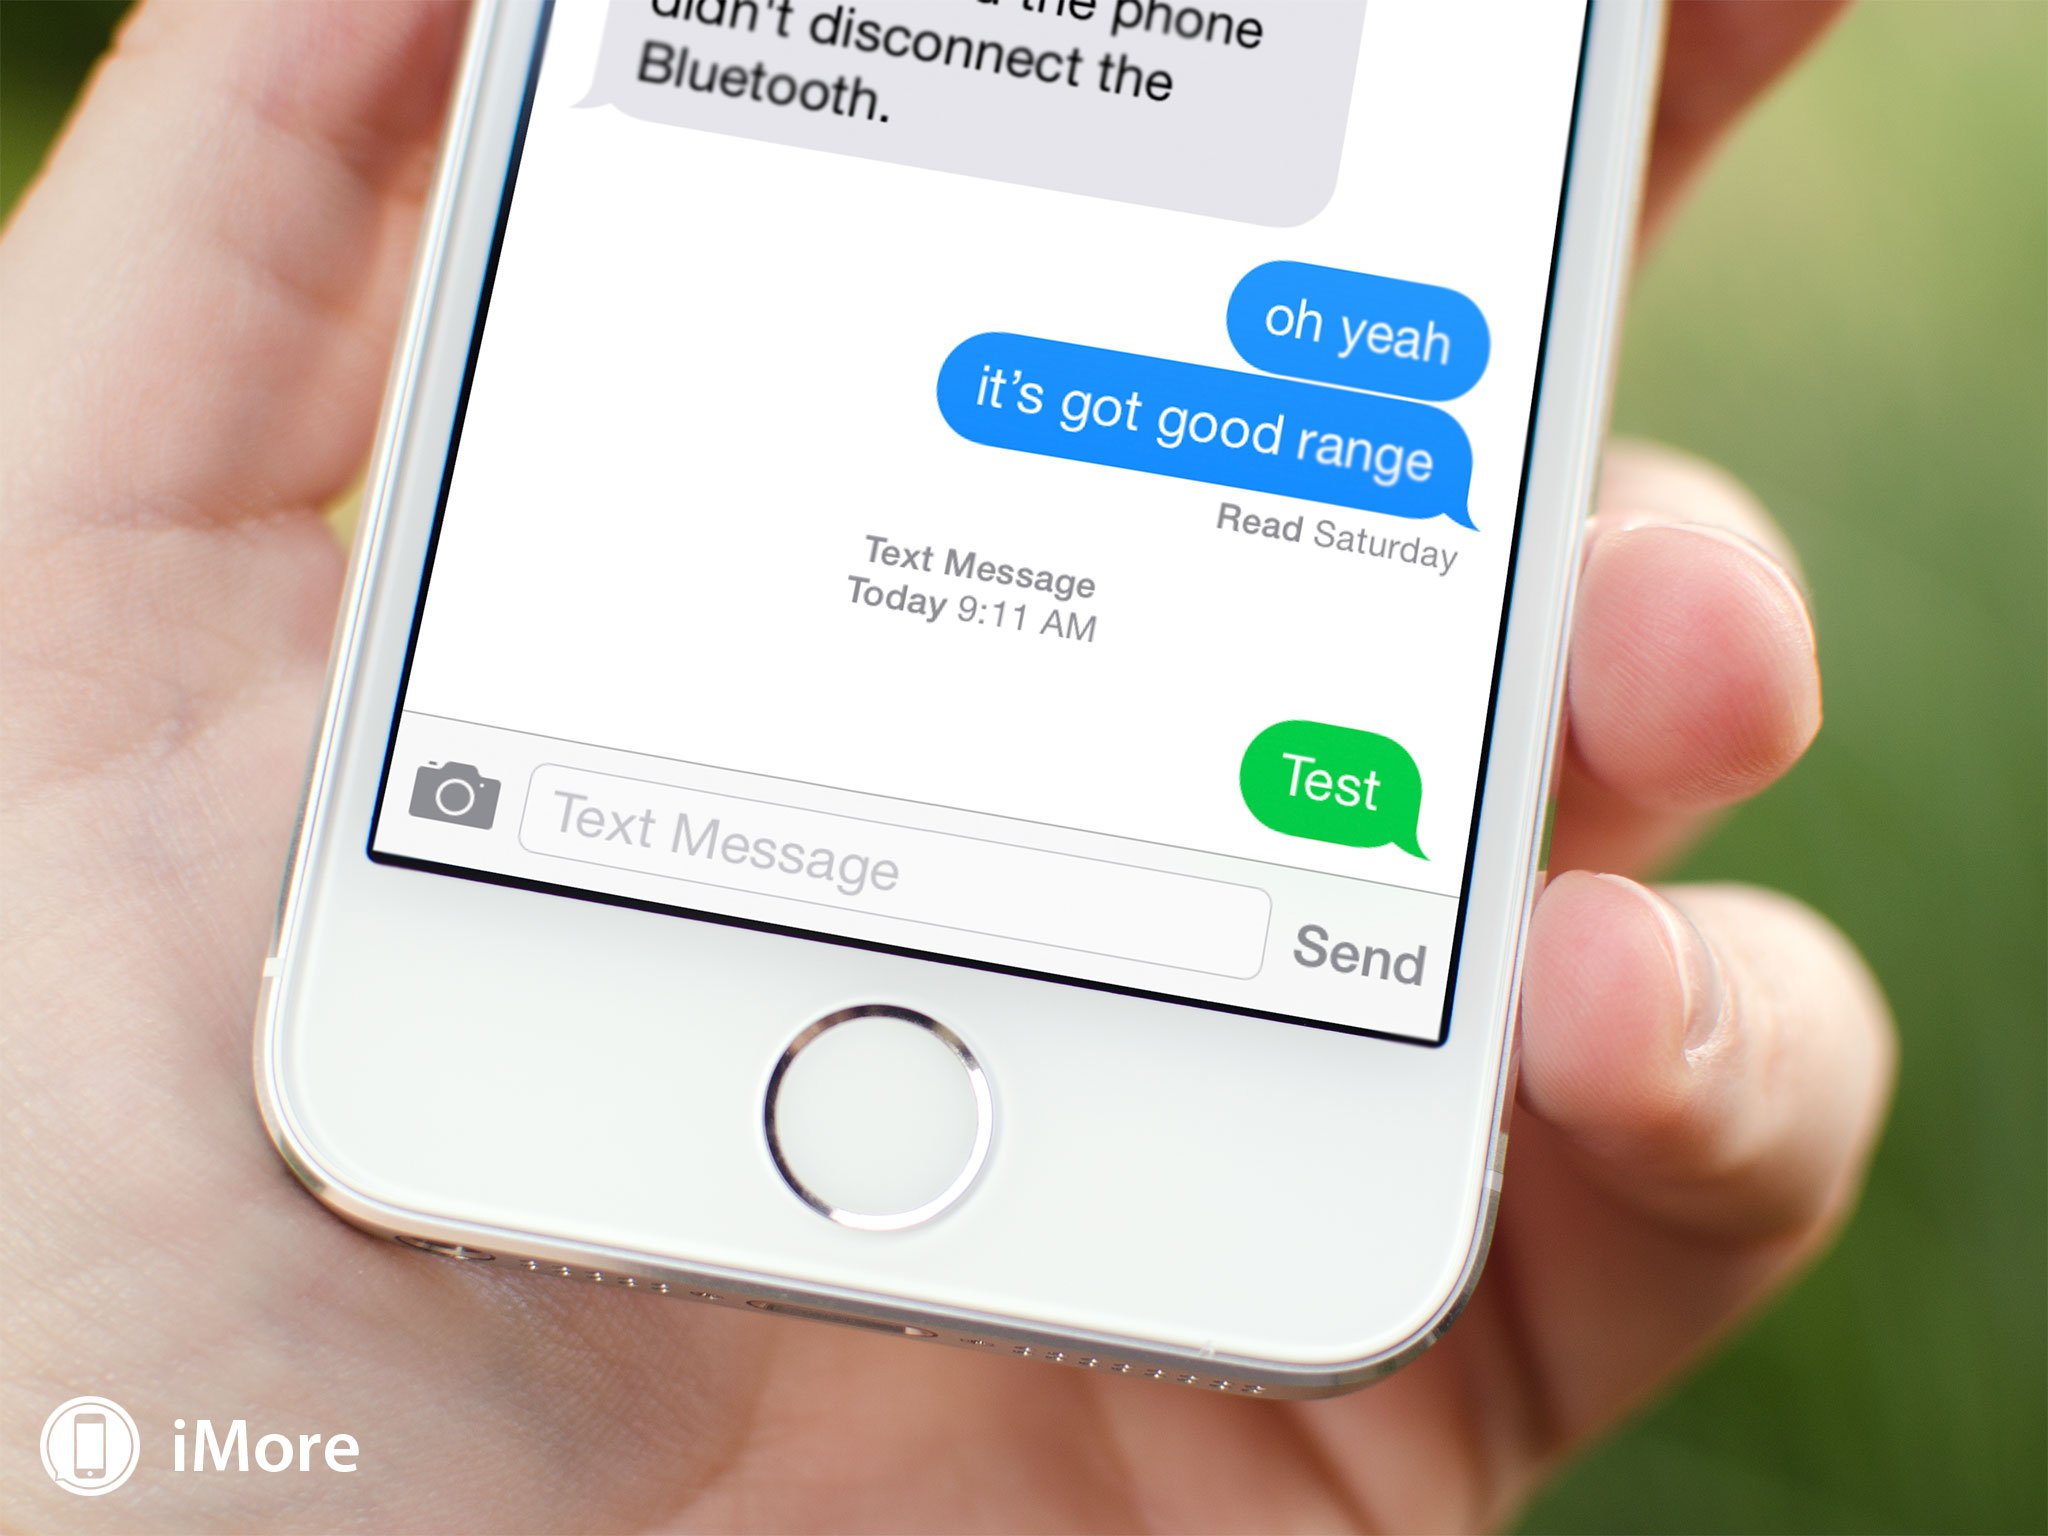 Apple fixes server-side iMessage bug, will fix additional bug in future software update